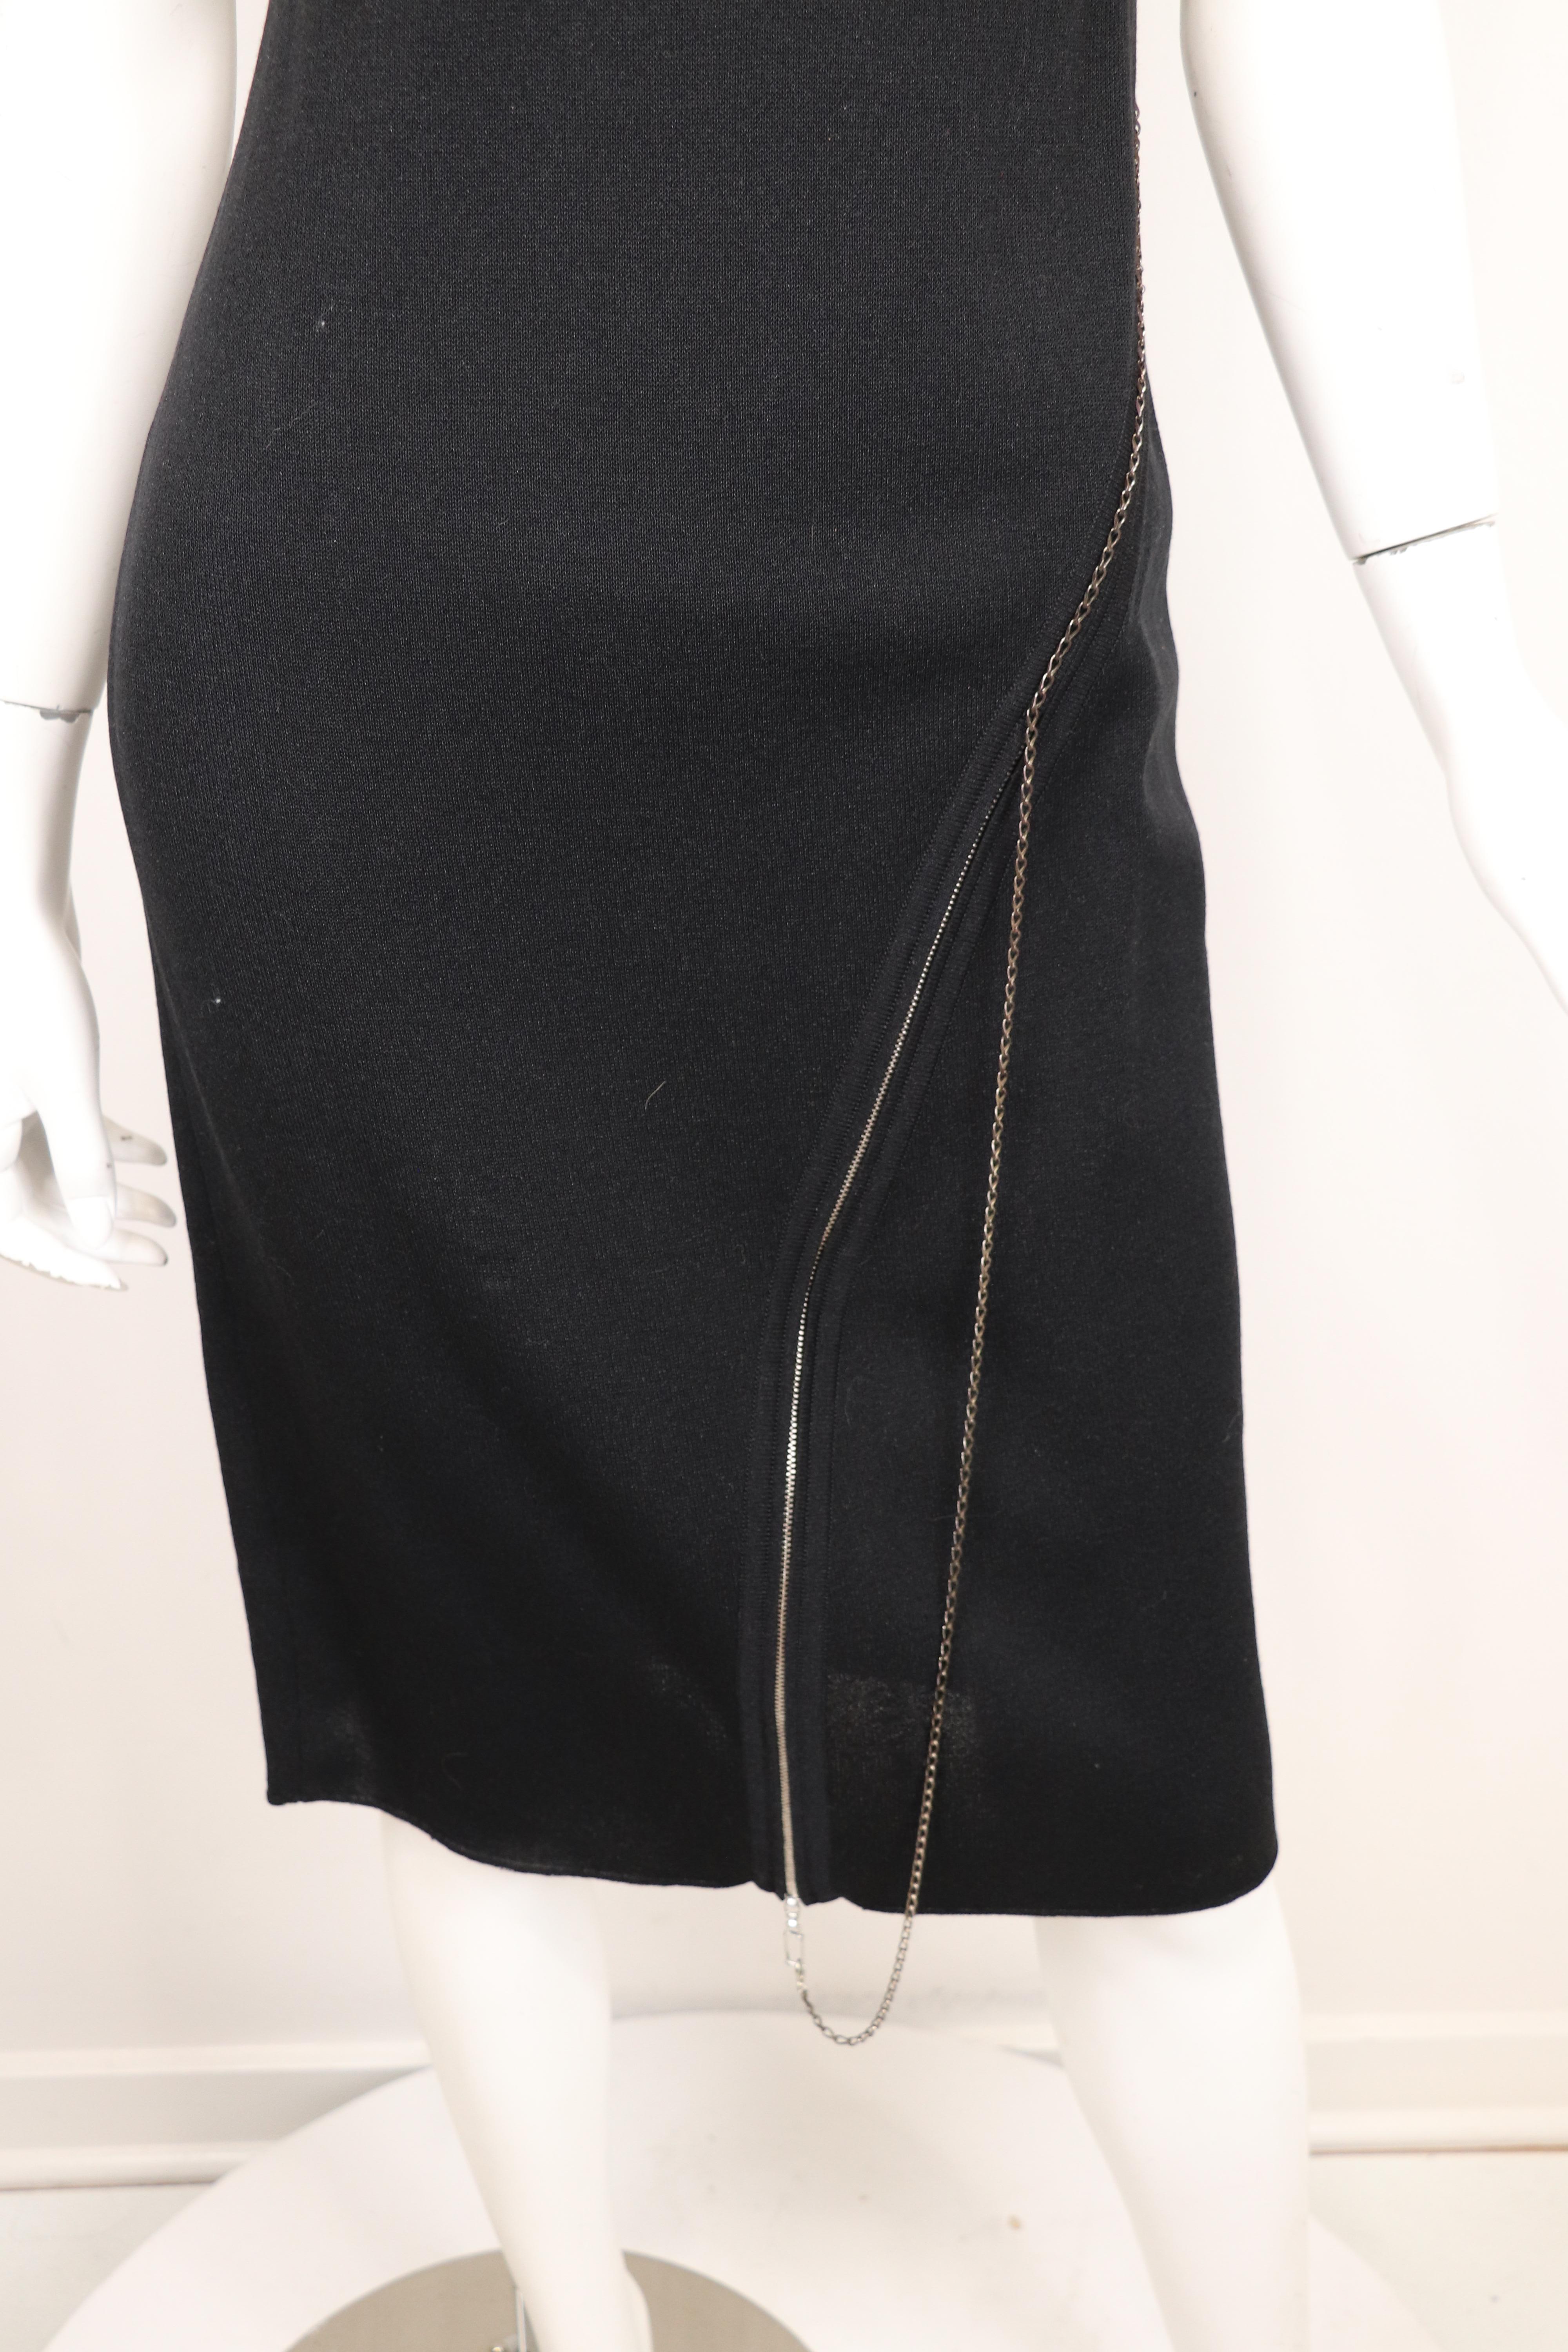 John Galliano Chain and Zipper Dress 1990's In Excellent Condition In Carmel, CA